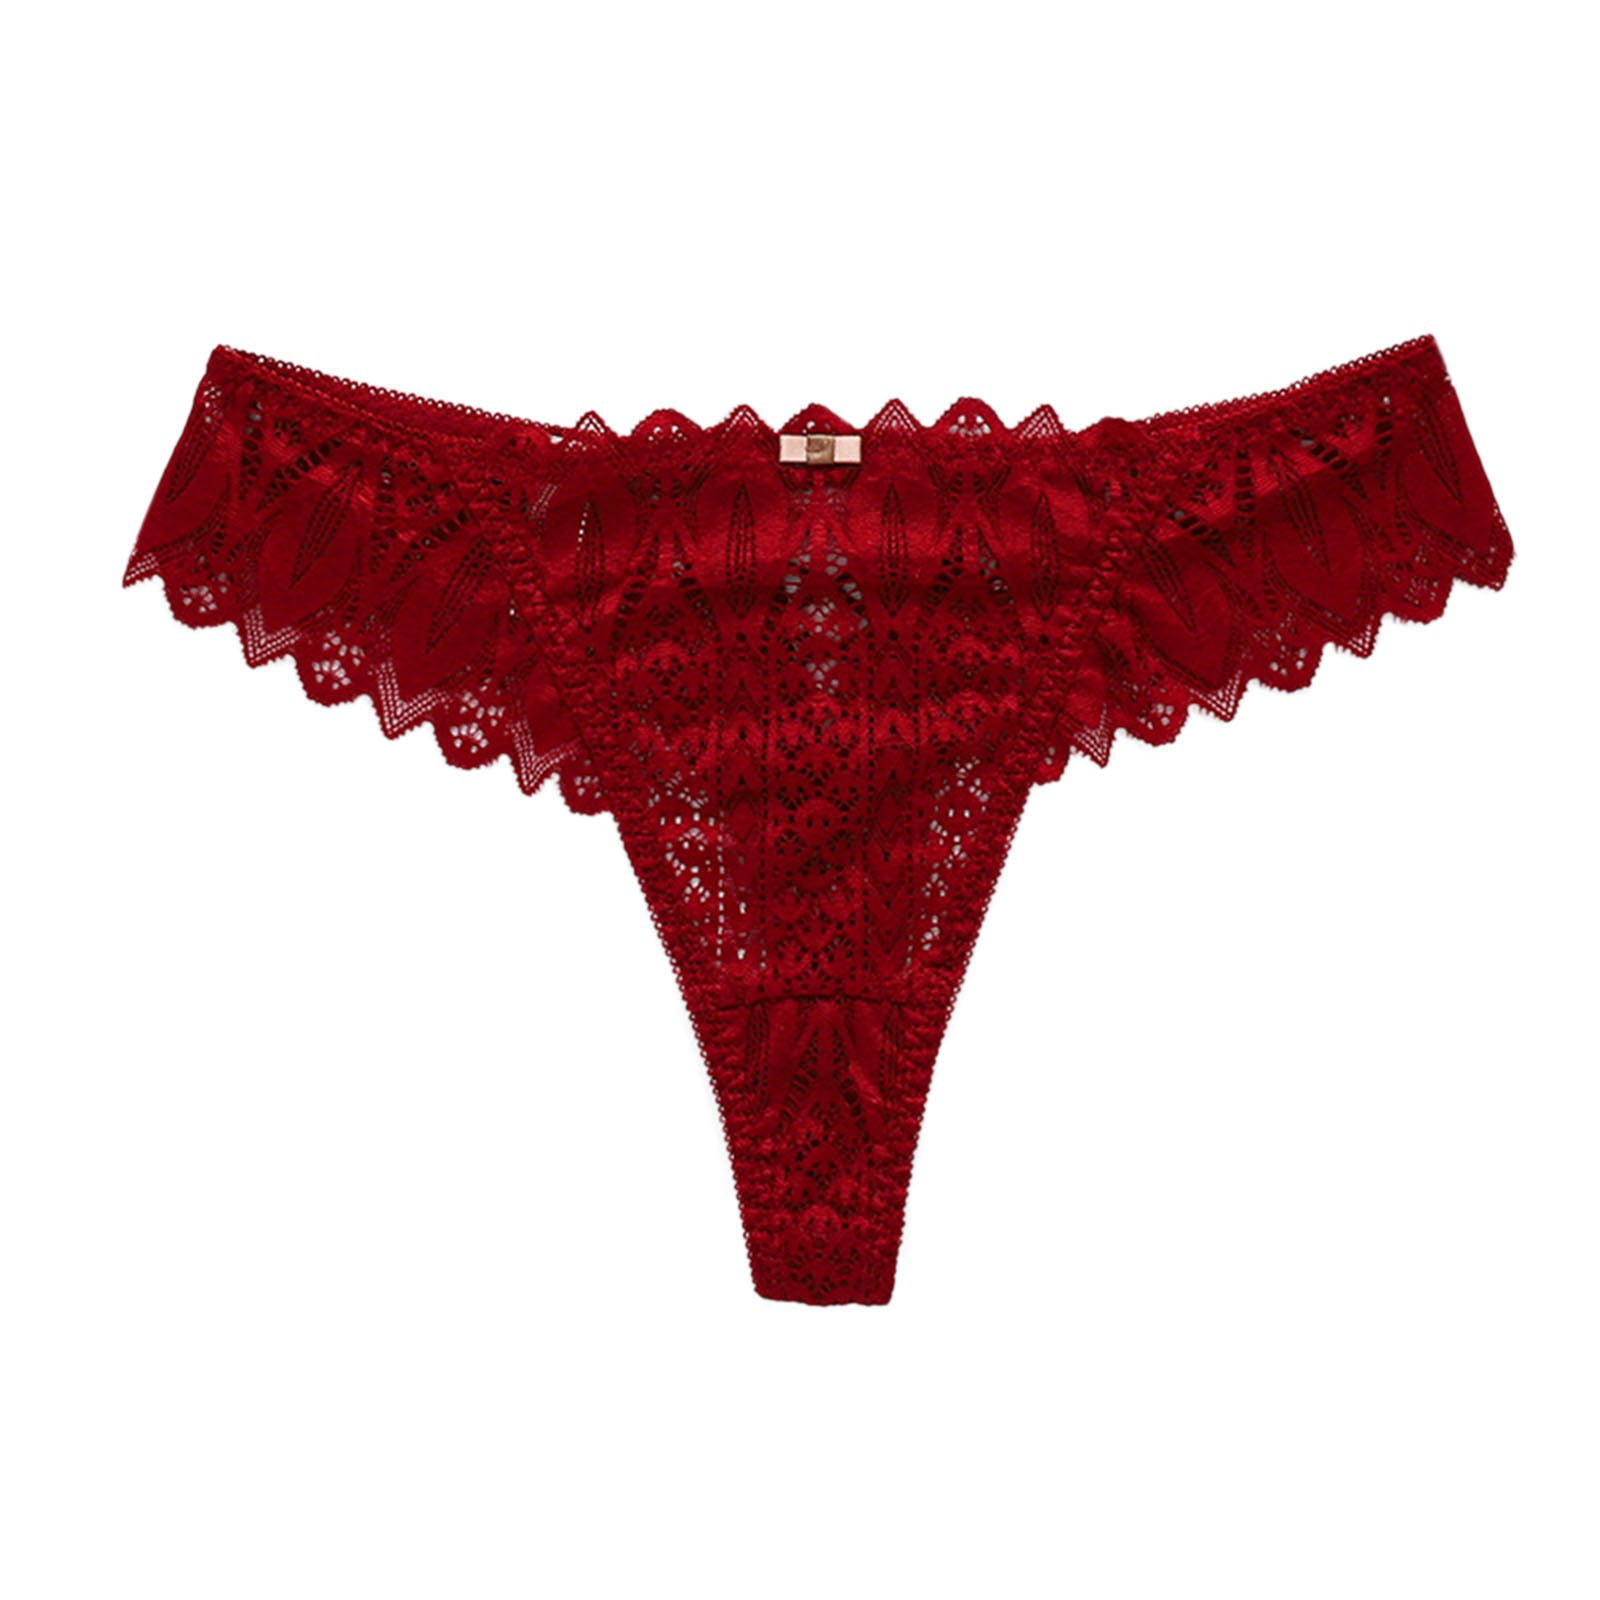 JDEFEG Women Panties Lace Panties for Women New Women Lace Embroidered  Butterfly Fashionable Underpants G String Wedgie Leggings Women Underwear